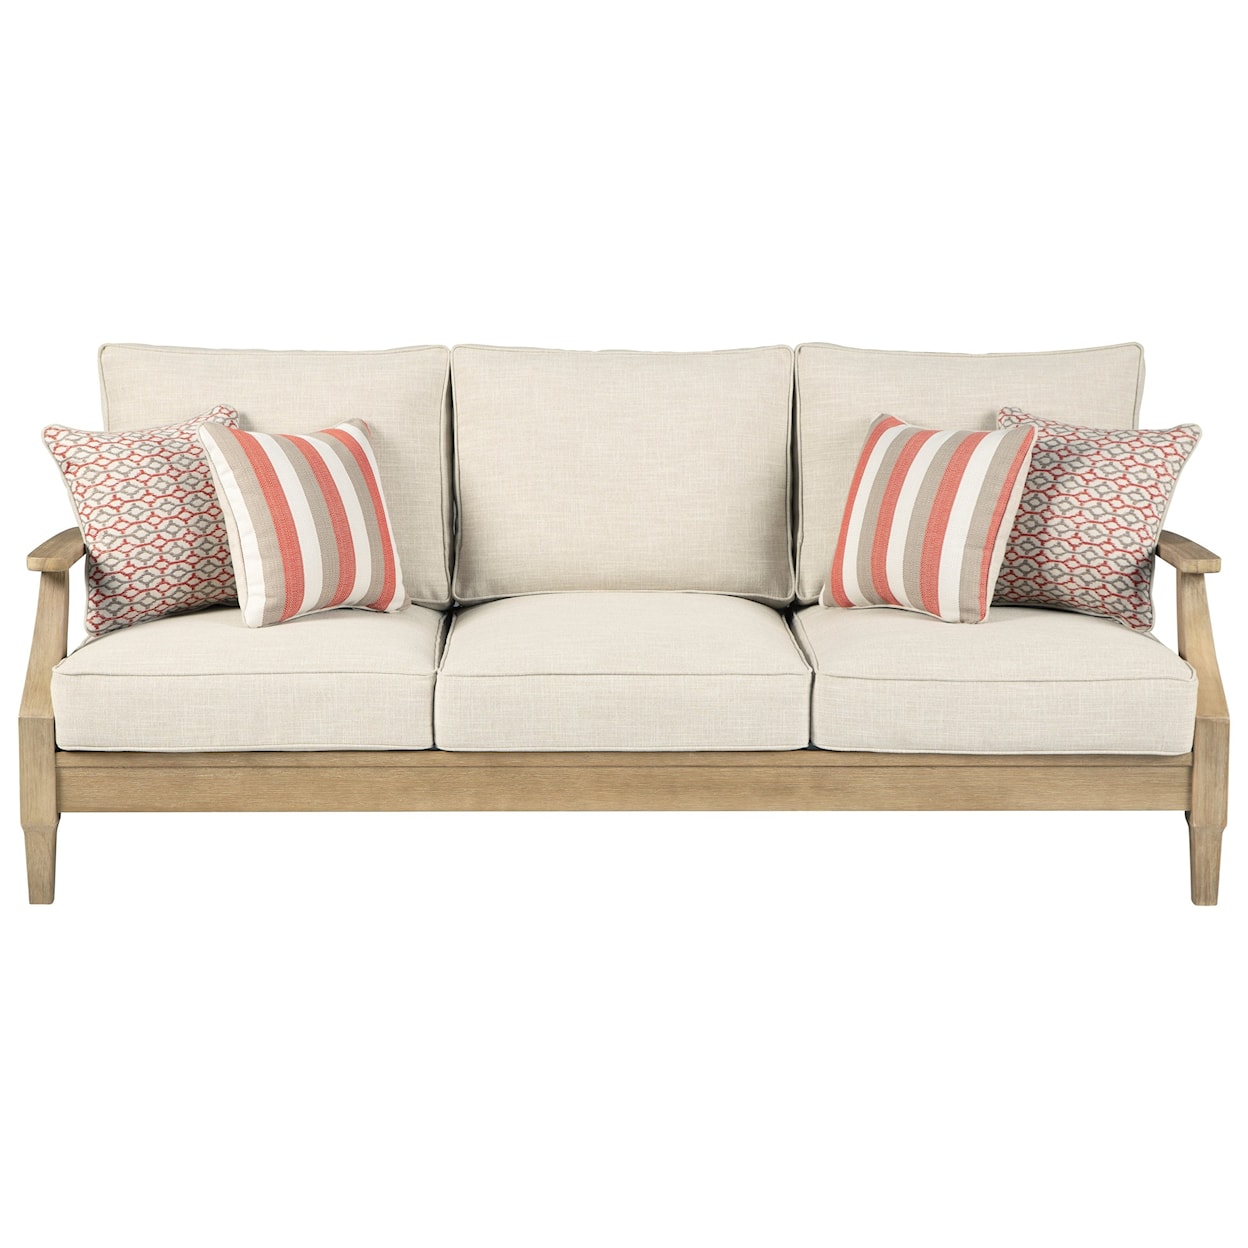 Benchcraft Clare View Sofa with Cushion